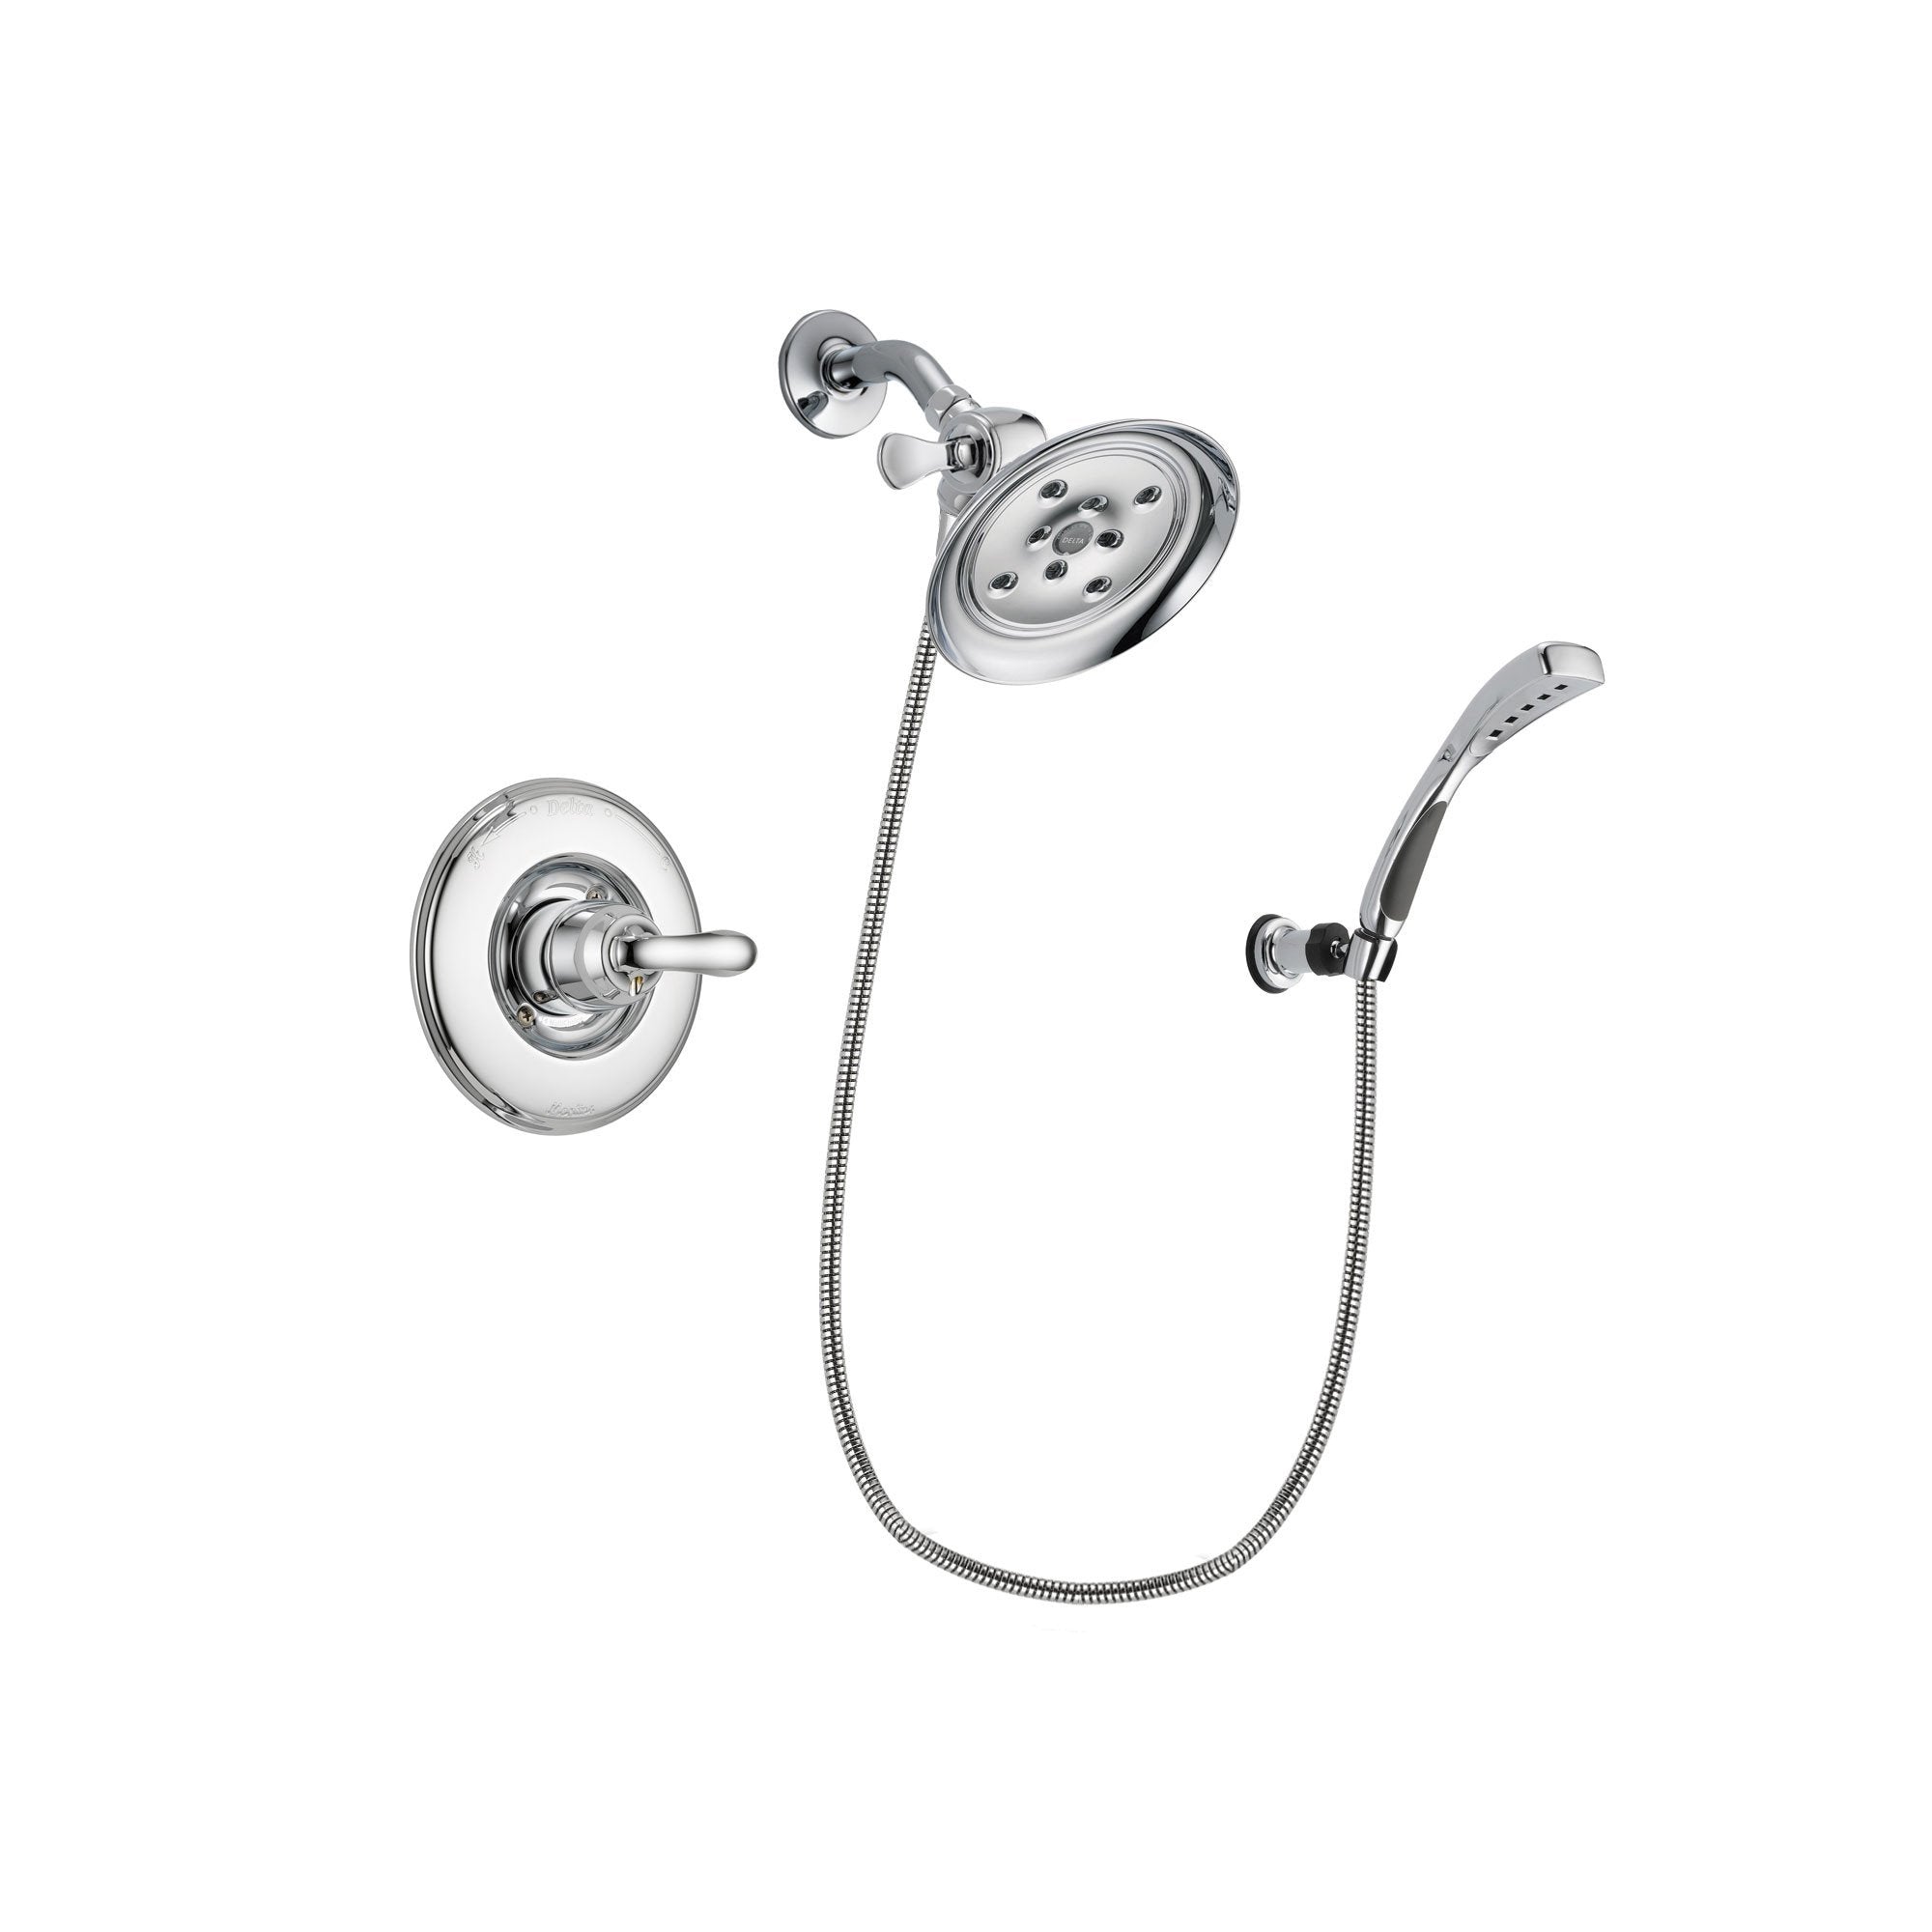 Delta Linden Chrome Finish Shower Faucet System Package with Large Rain Showerhead and Wall-Mount Bracket with Handheld Shower Spray Includes Rough-in Valve DSP1056V